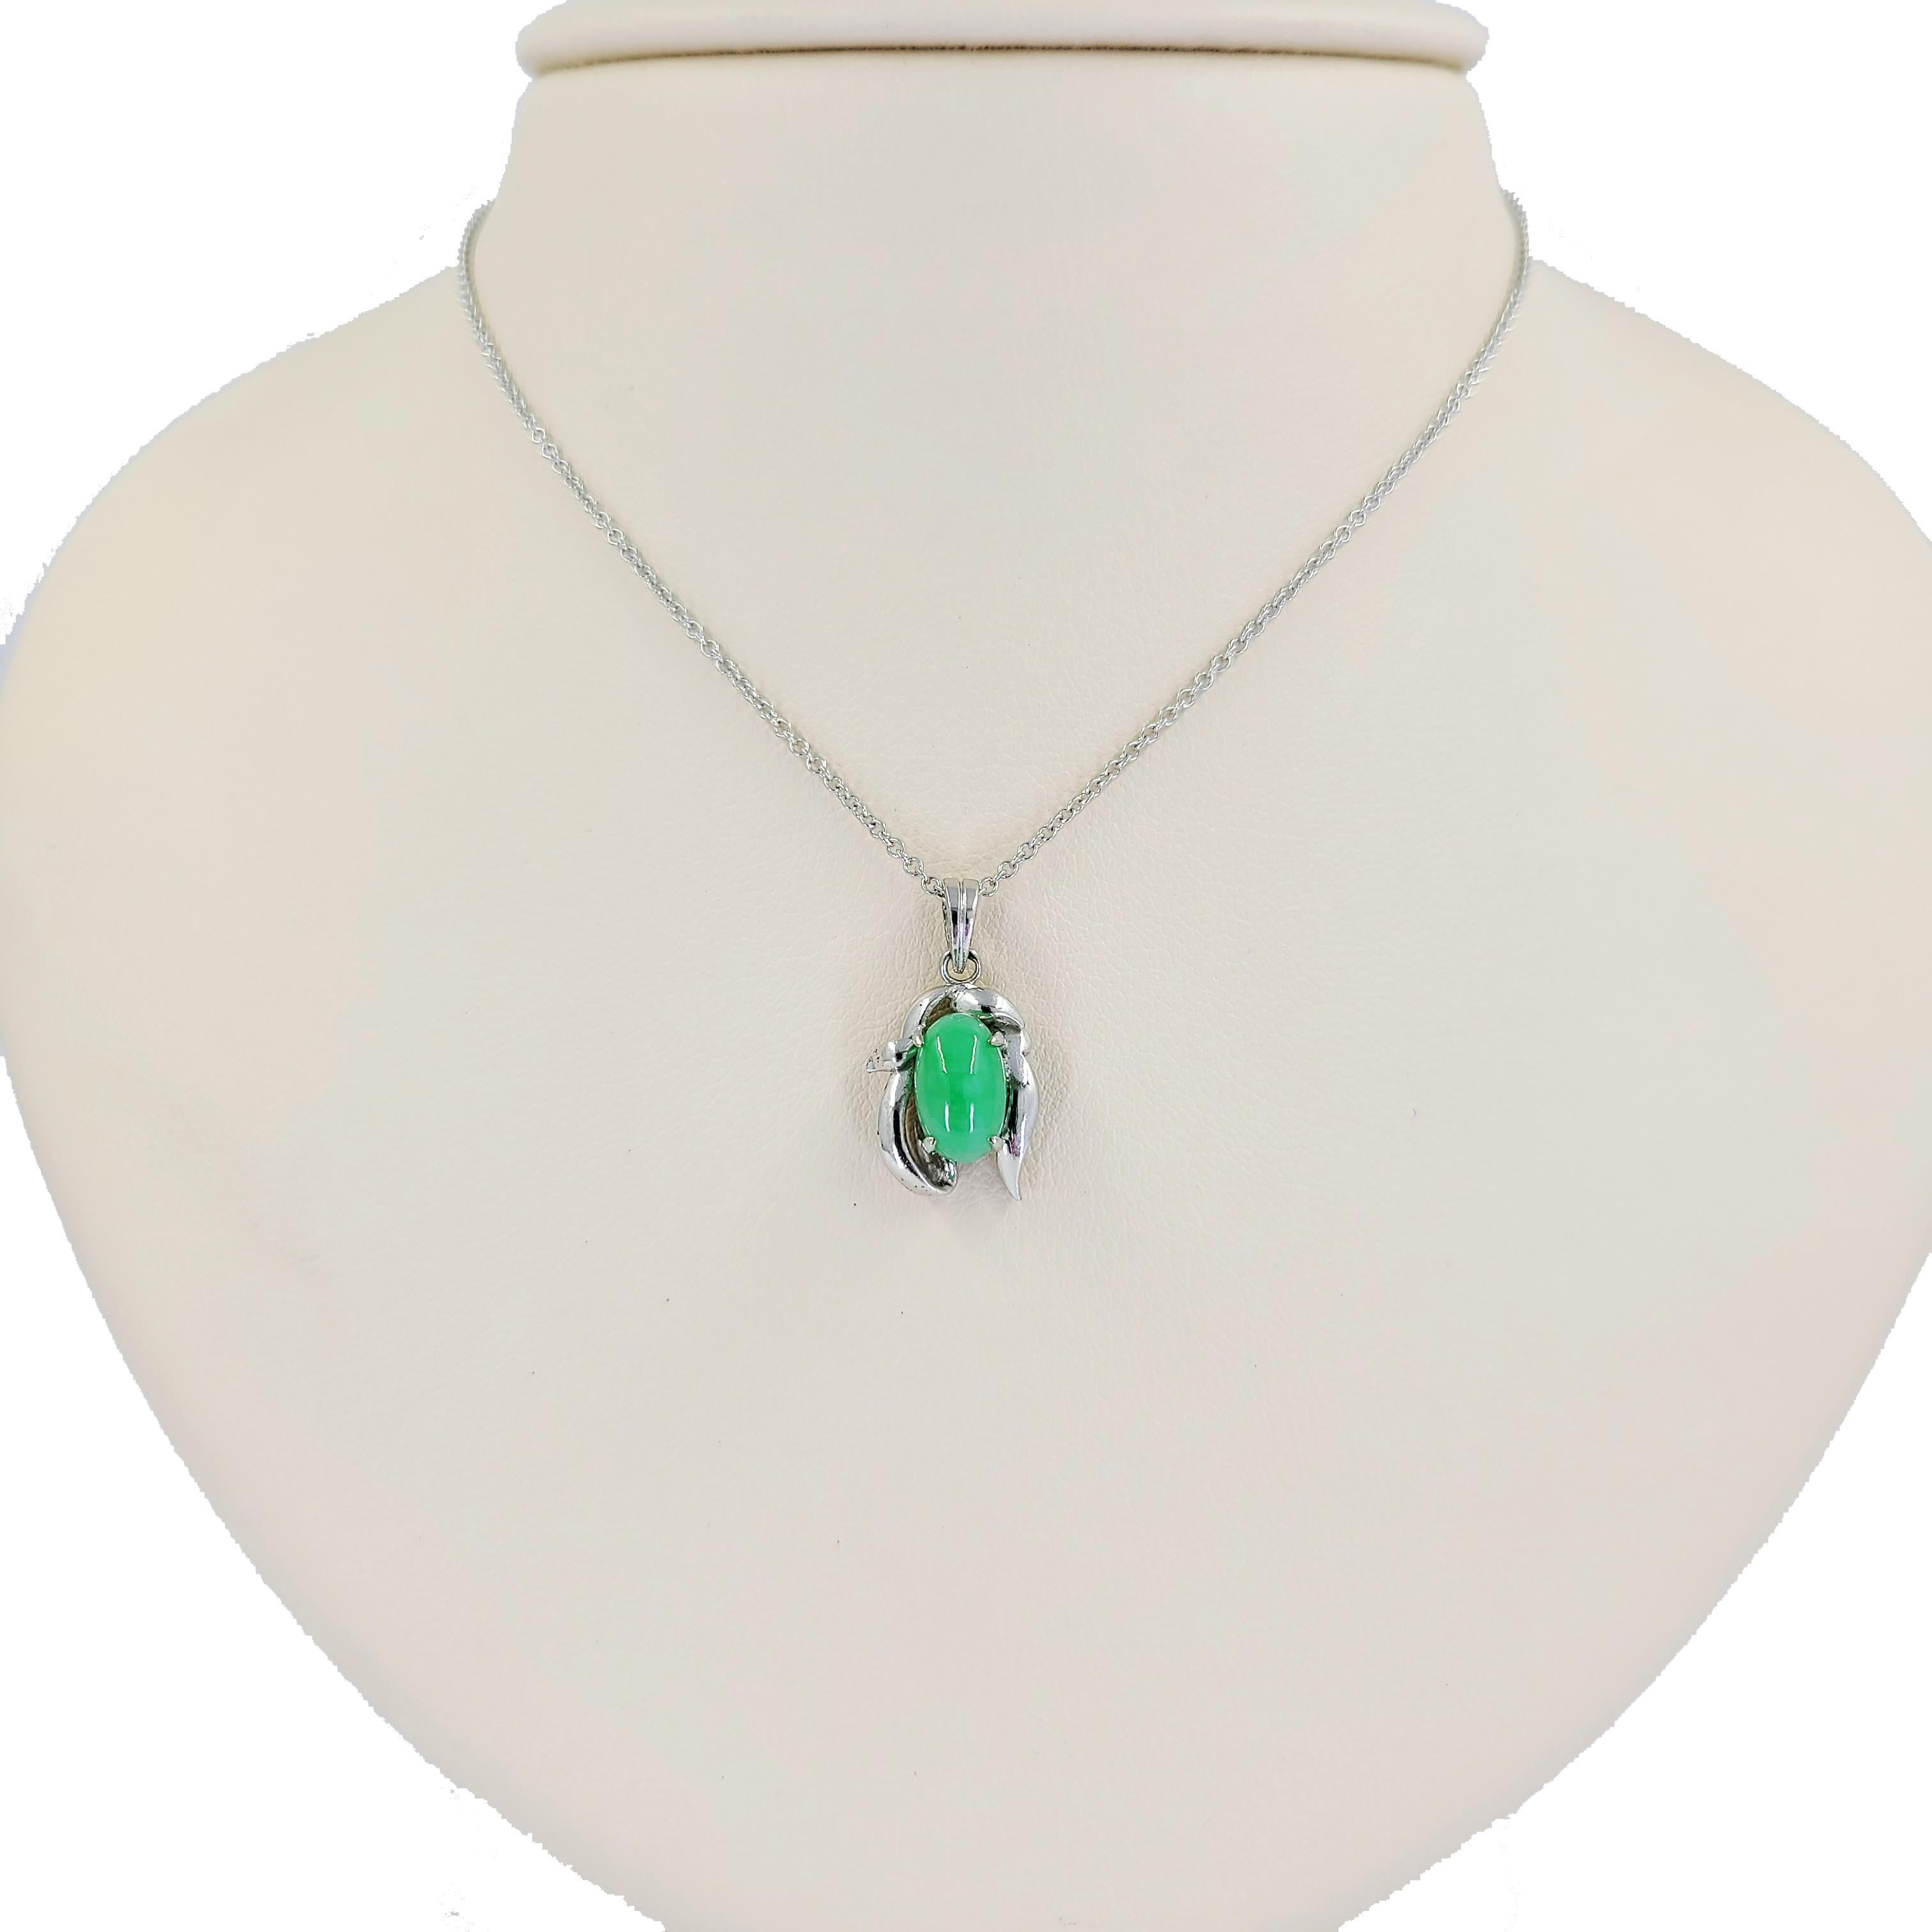 18 Karat White Gold Pendant Featuring An Oval Cabochon Cut Jade Surrounded By Freeform Gold. The Pendant Slides Freely On An 18 Karat White Gold 16 Inch Chain. Finished Weight Is 3.7 Grams.